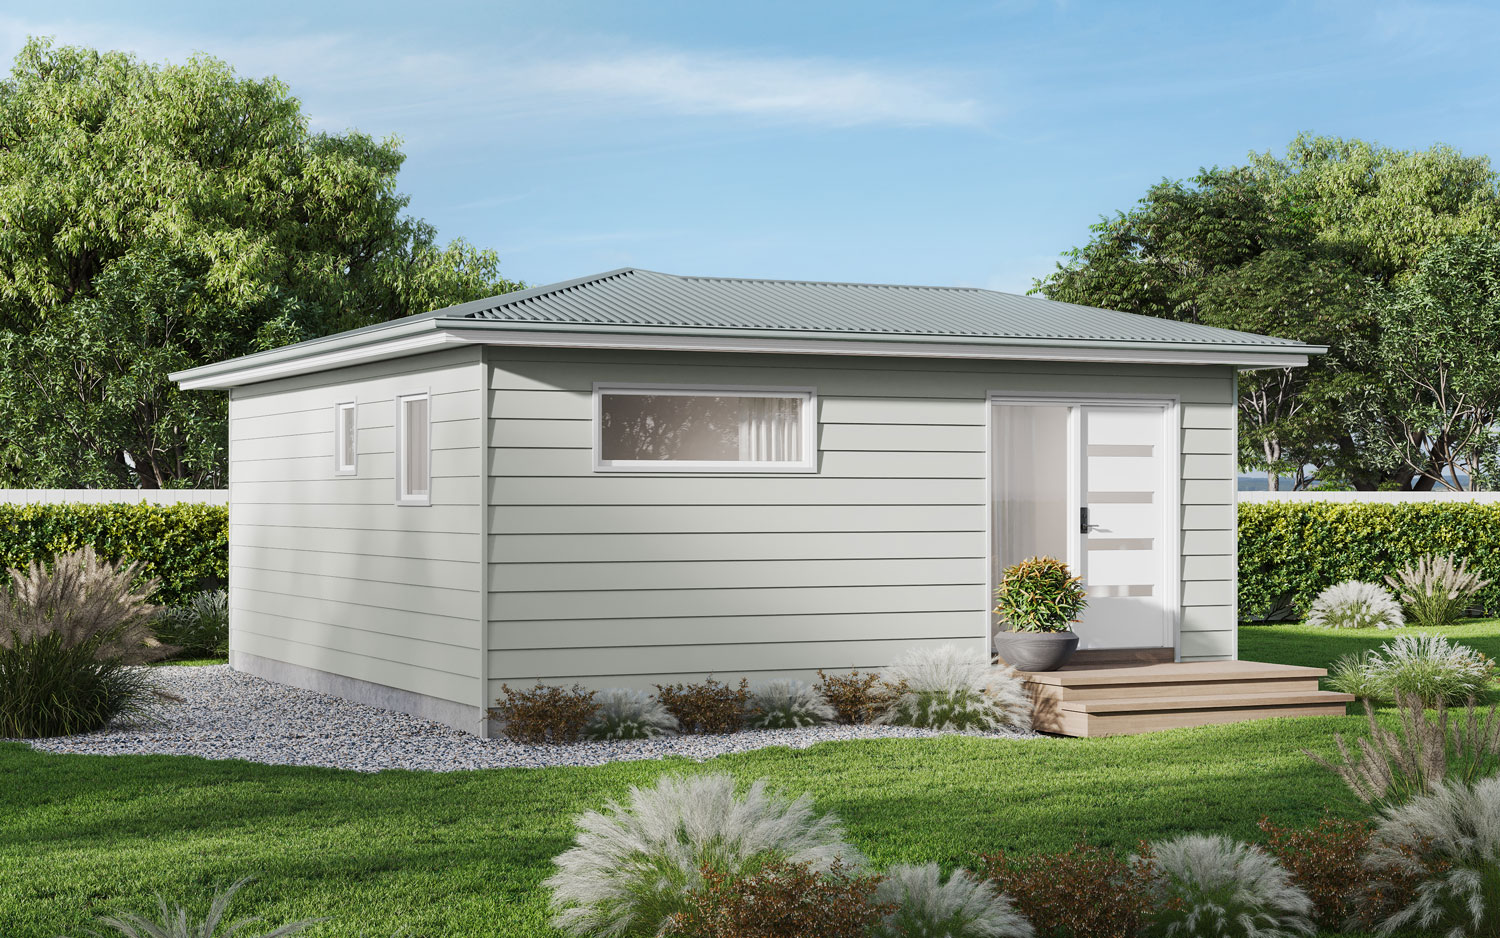 What Is a Granny Flat?